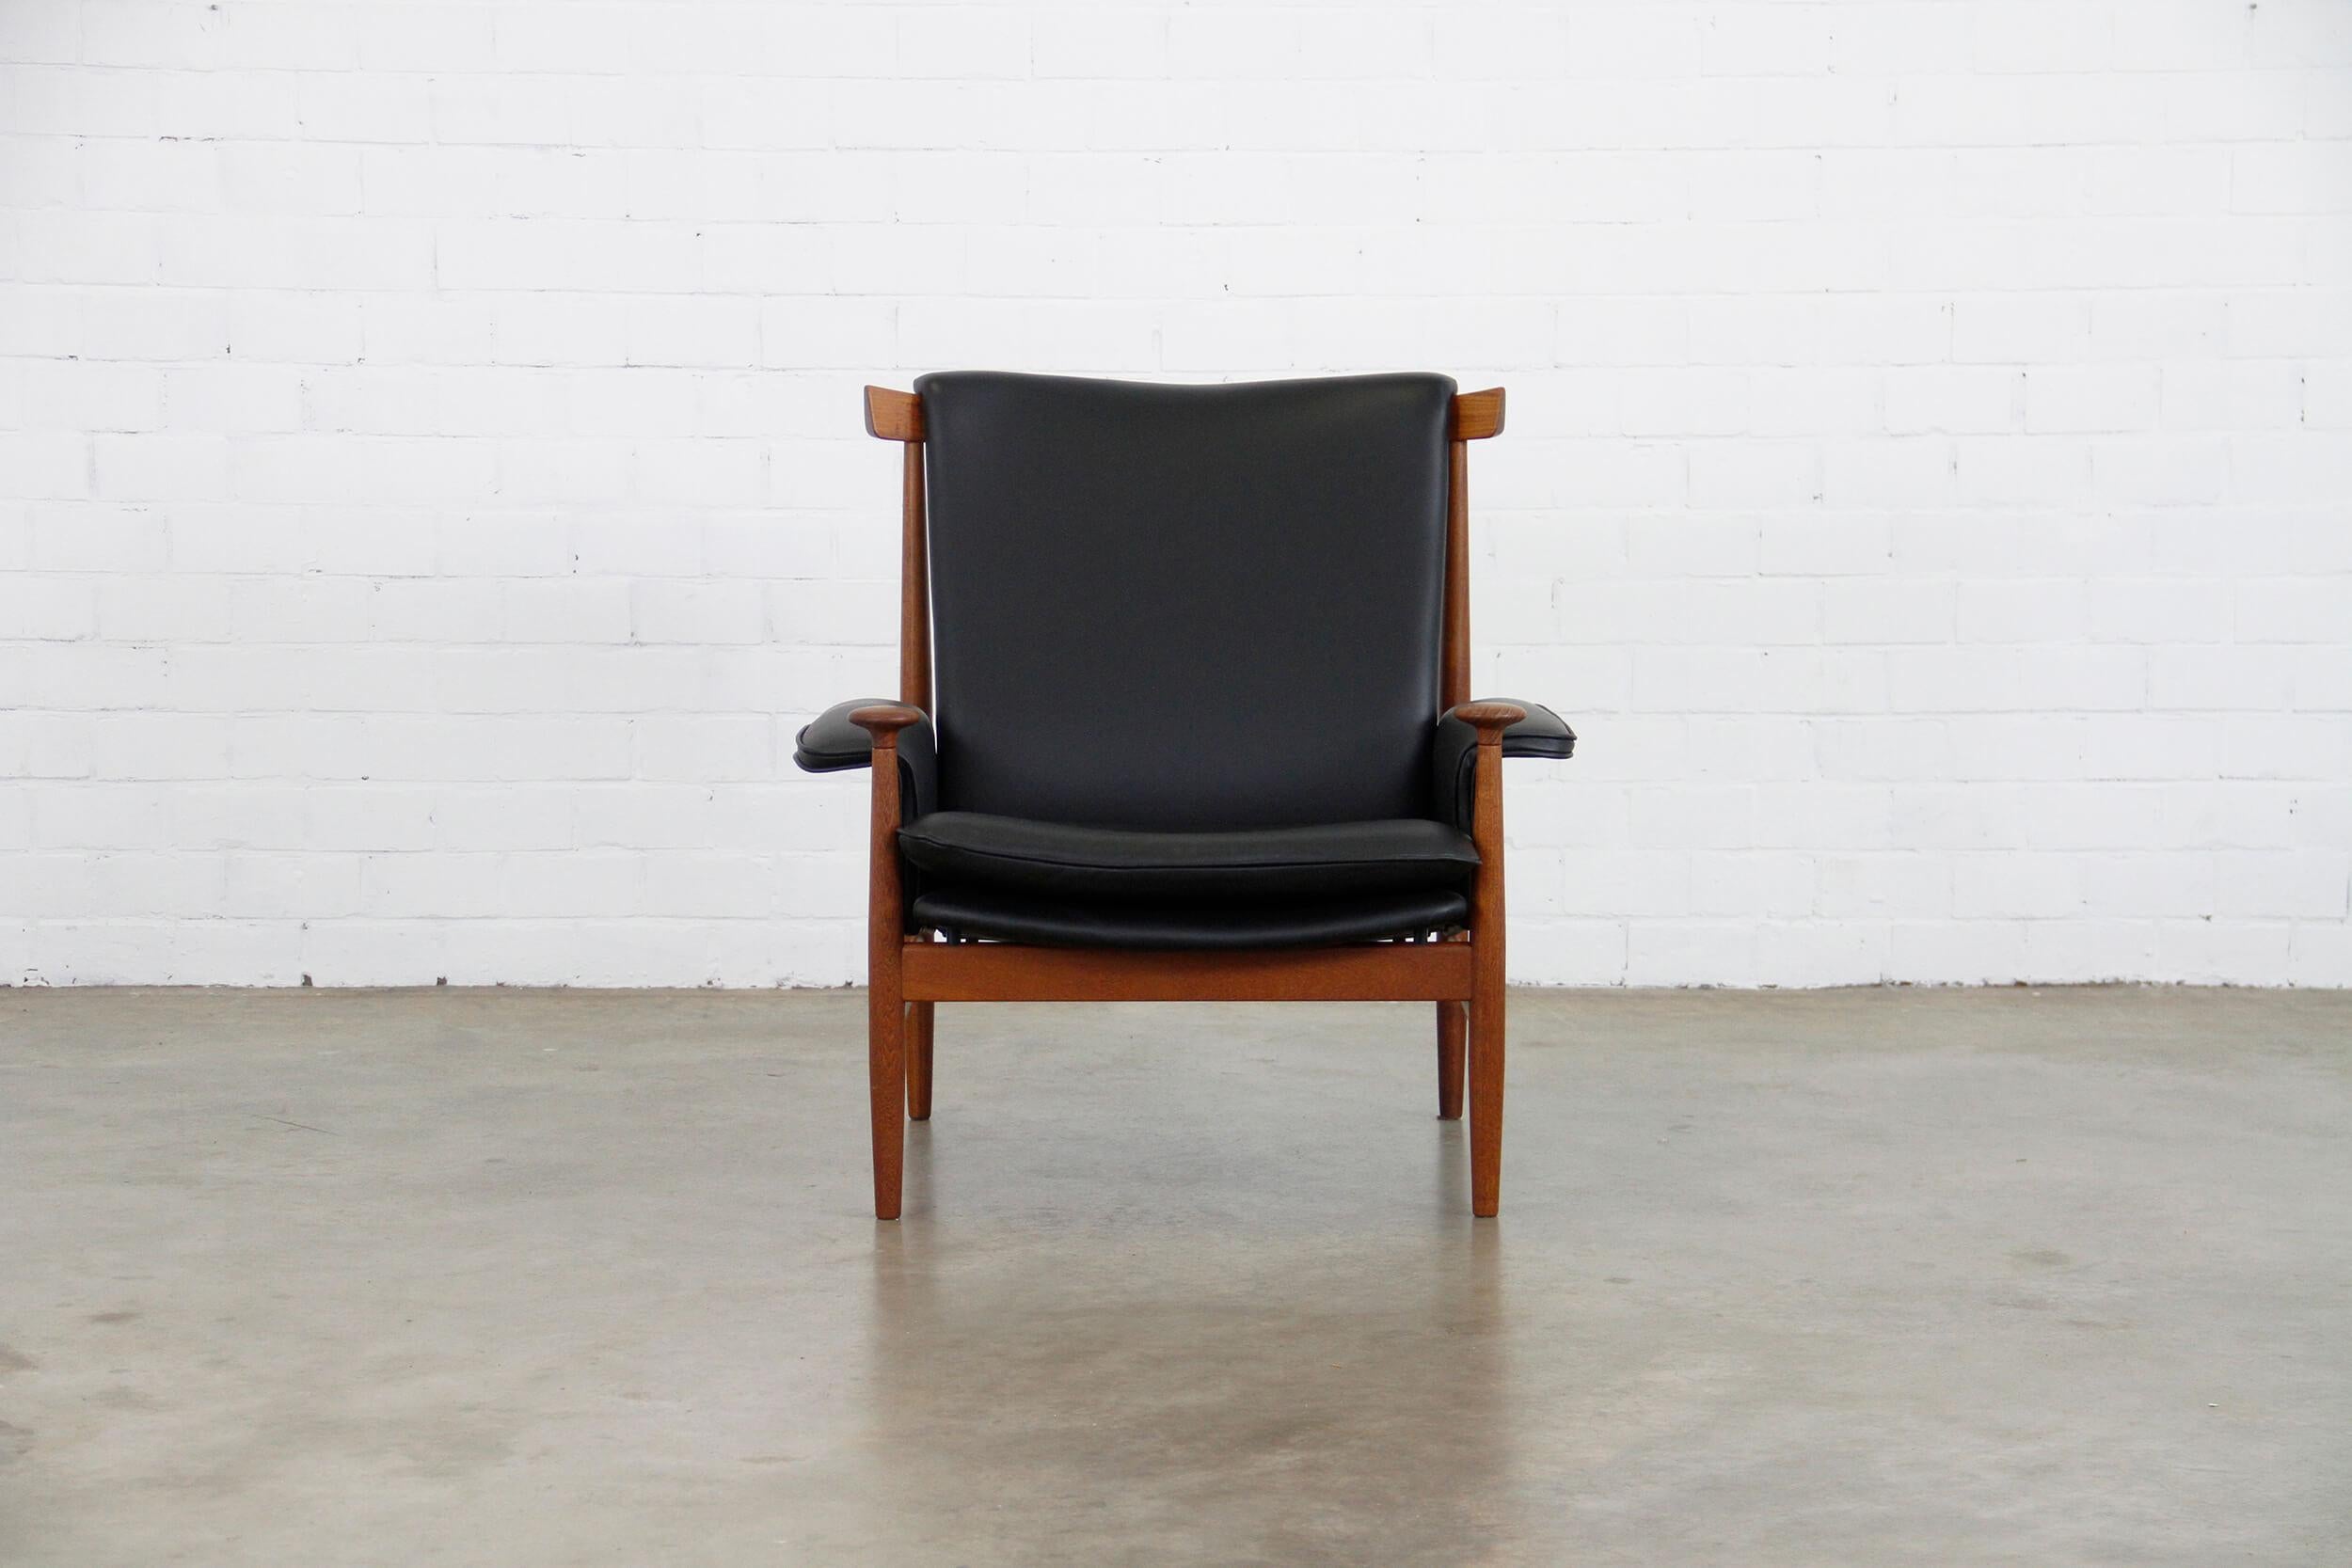 Danish Leather and Teak Bwana Model 152 Chair by Finn Juhl for France & Søn 1962 In Good Condition For Sale In Wijnegem, Antwerpen